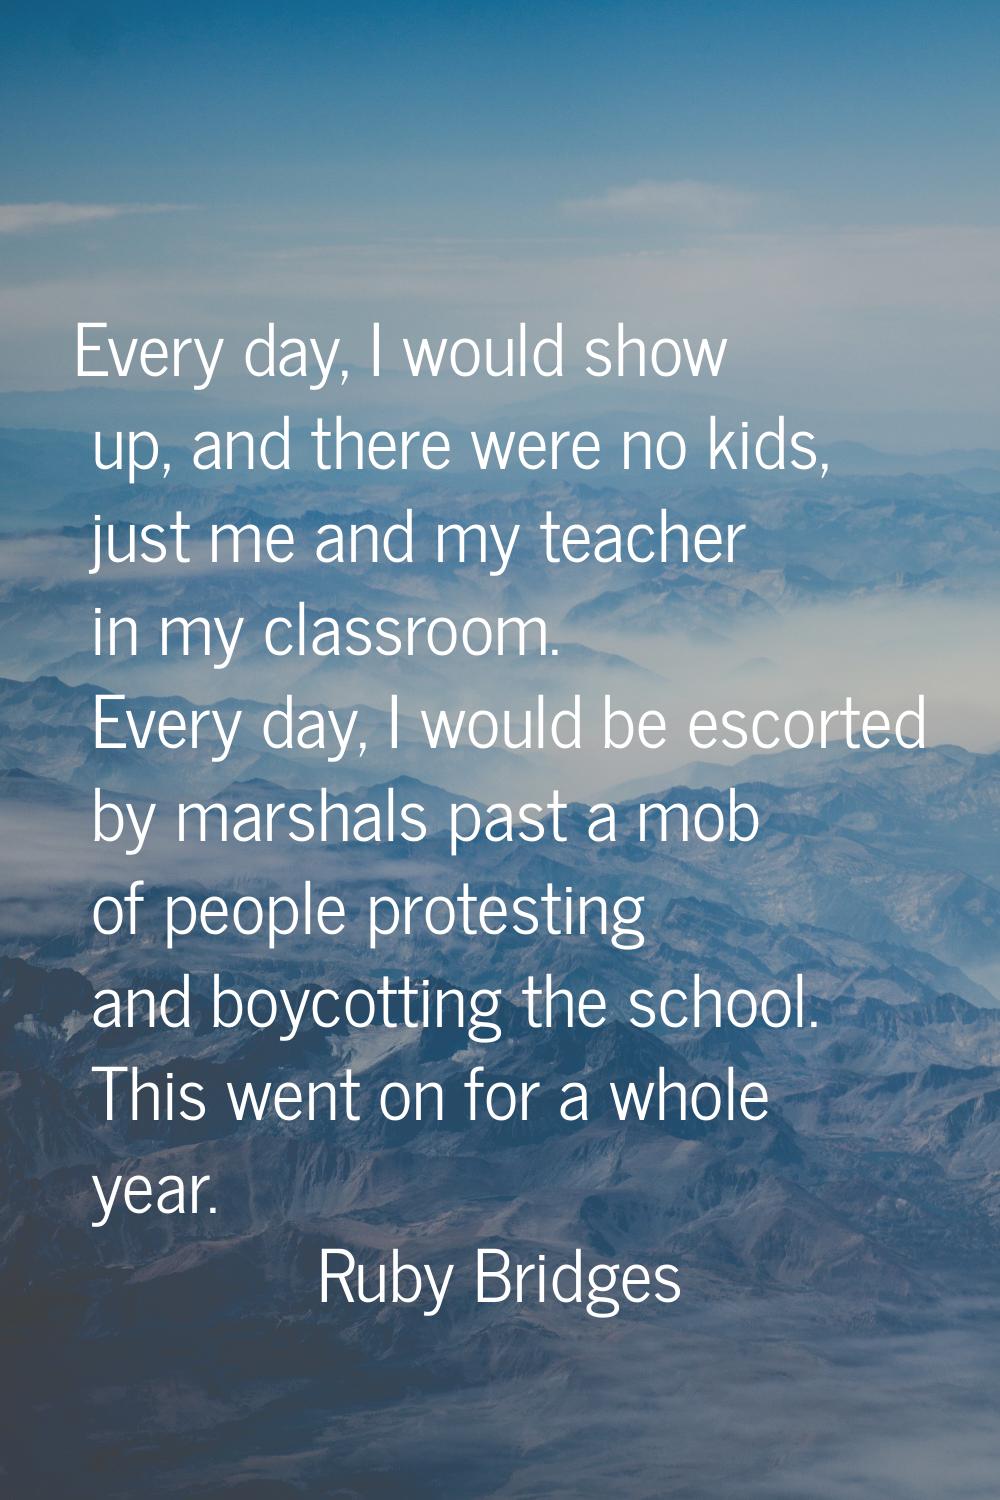 Every day, I would show up, and there were no kids, just me and my teacher in my classroom. Every d